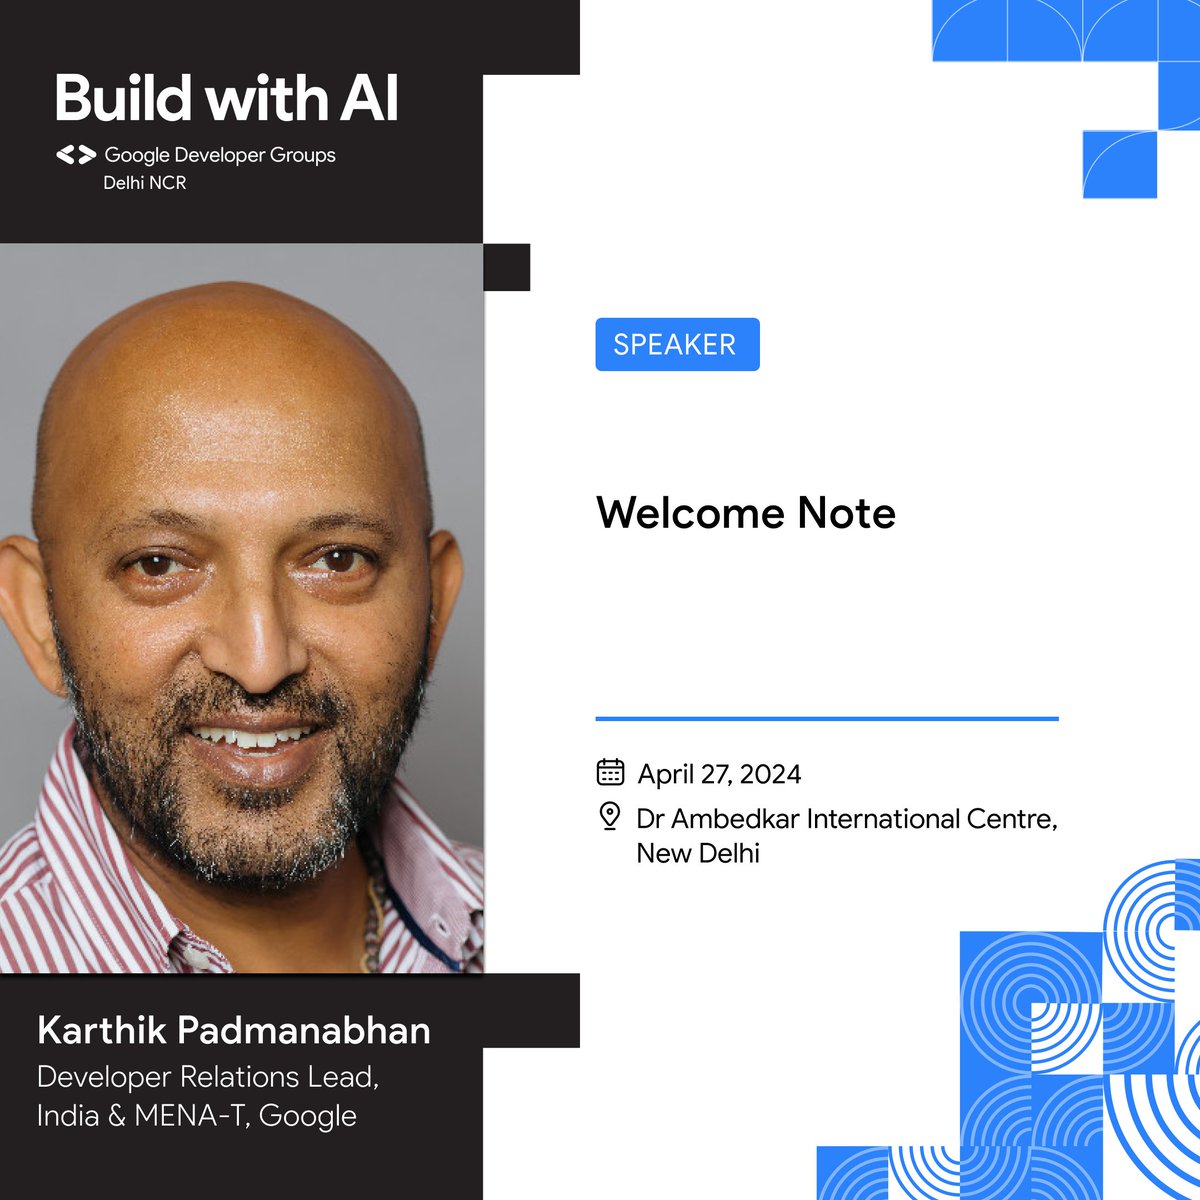 We're thrilled to have @karthik_padman, Developer Relations Lead at Google India, to kick off our Build With AI Roadshow at @ambedkar_center! Don't miss this incredible opportunity to learn, connect, and be inspired! #BuildWithAIRoadshow #AI #Gemini #ArtificialIntelligence